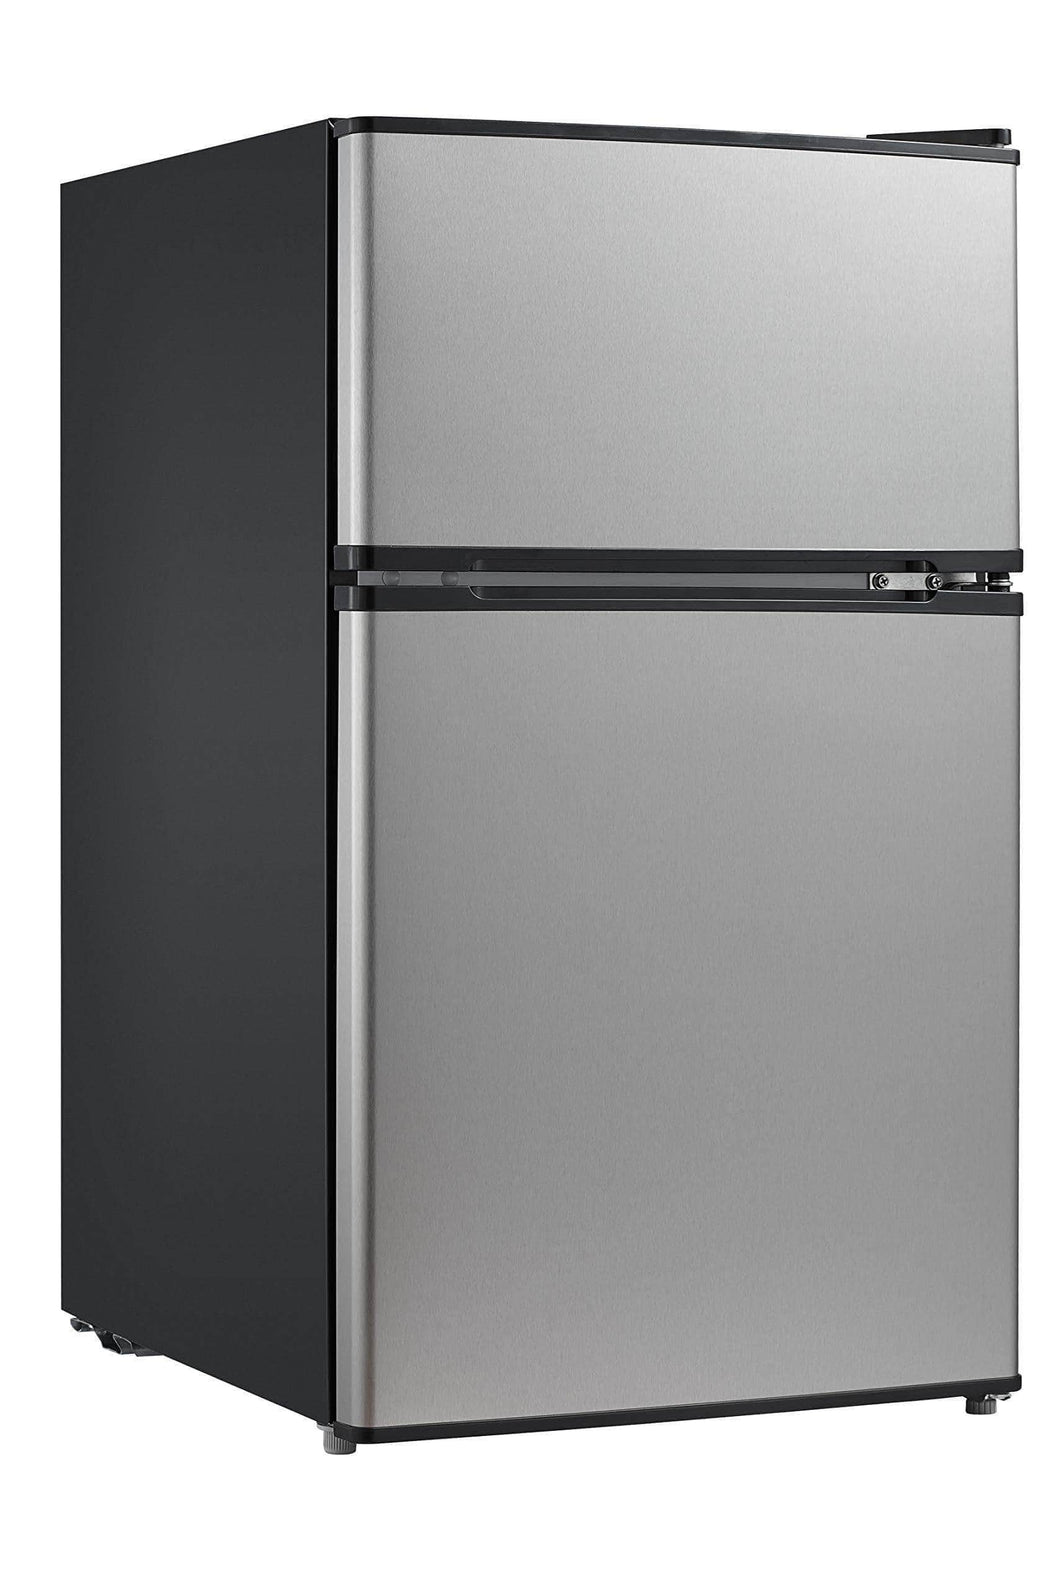 Home midea whd 113fss1 double door mini fridge with freezer for bedroom office or dorm with adjustable remove glass shelves compact refrigerator 3 1 cu ft stainless steel